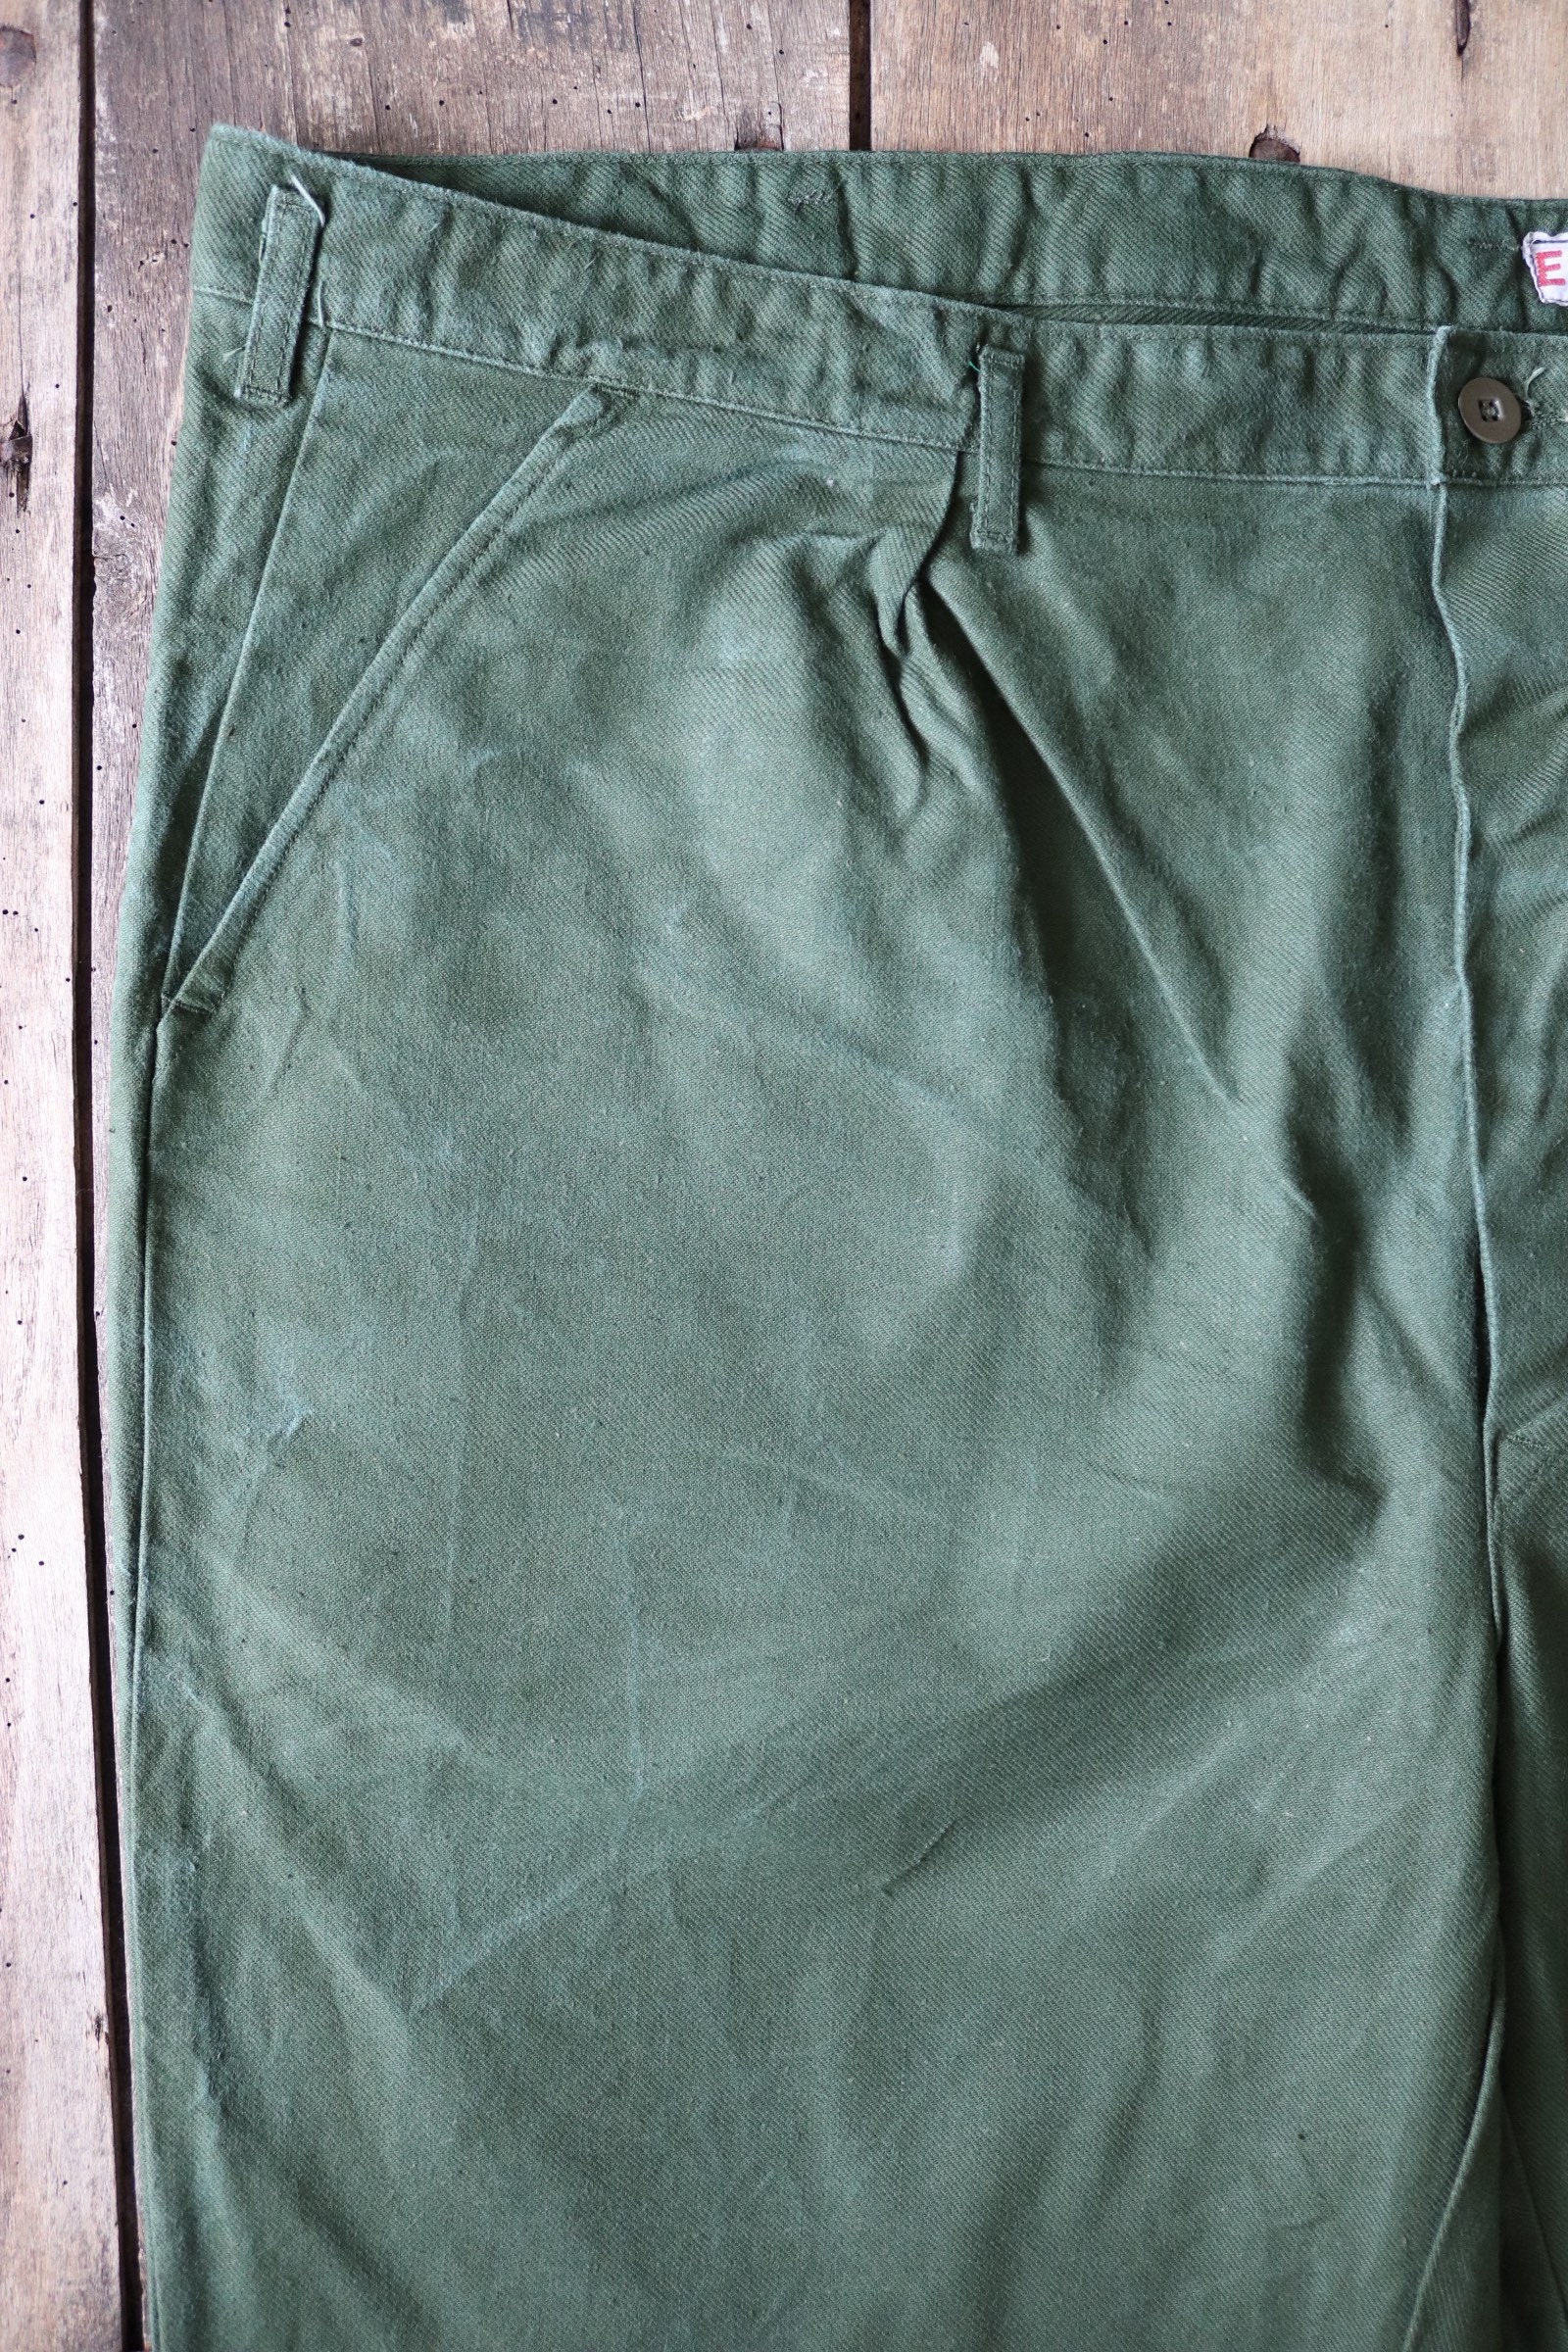 Vintage 1980s 80s Swedish army military green cotton twill utility